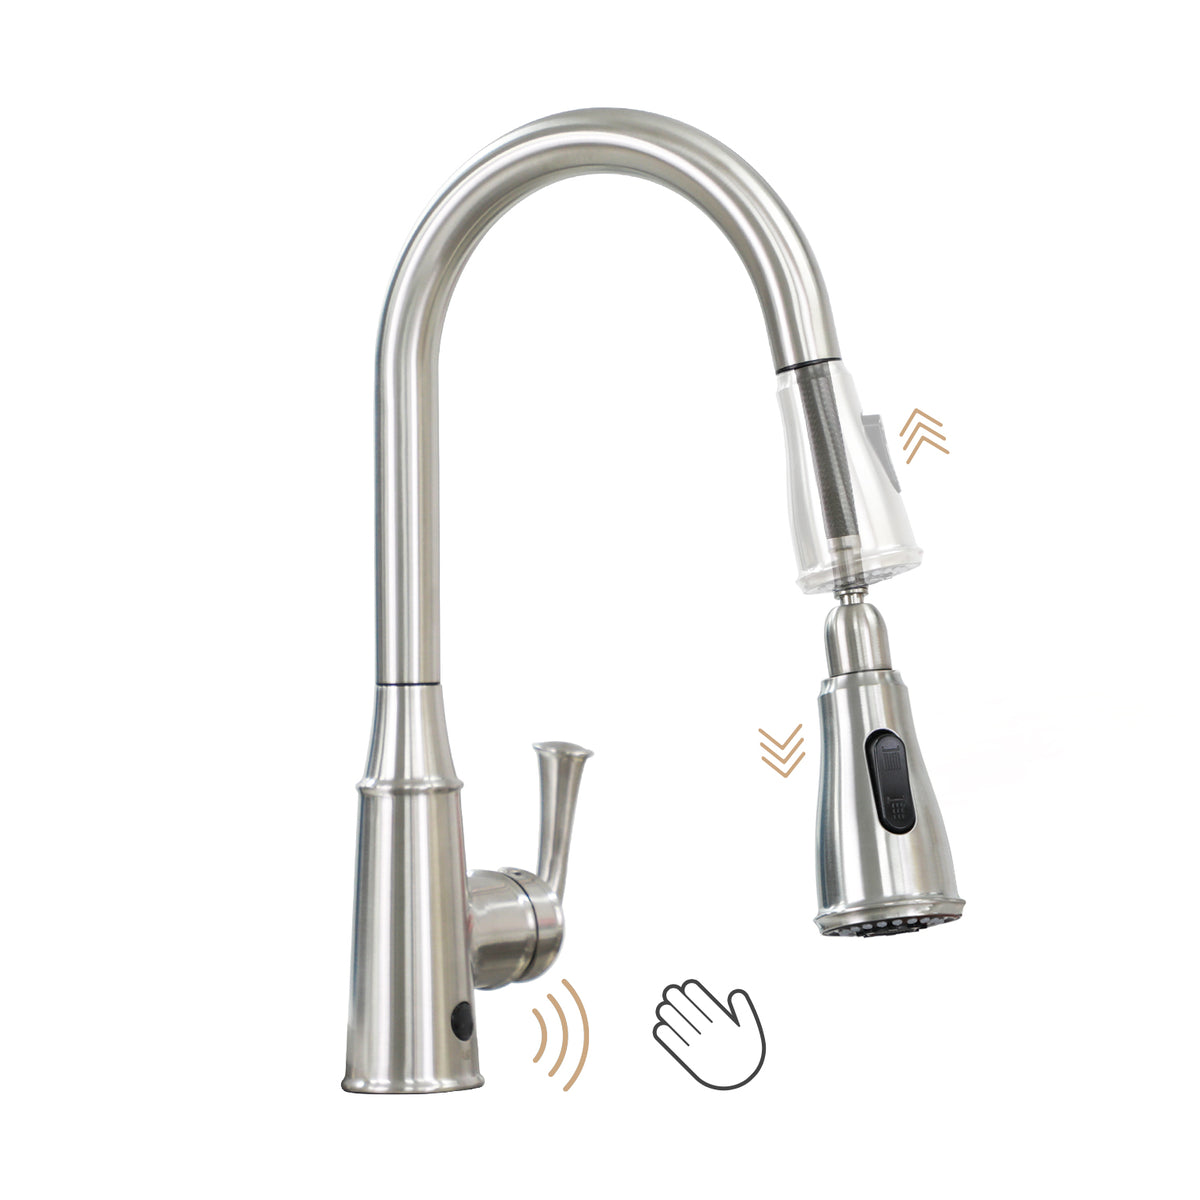 R&T Touchless Kitchen Faucet with Pull Down Sprayer